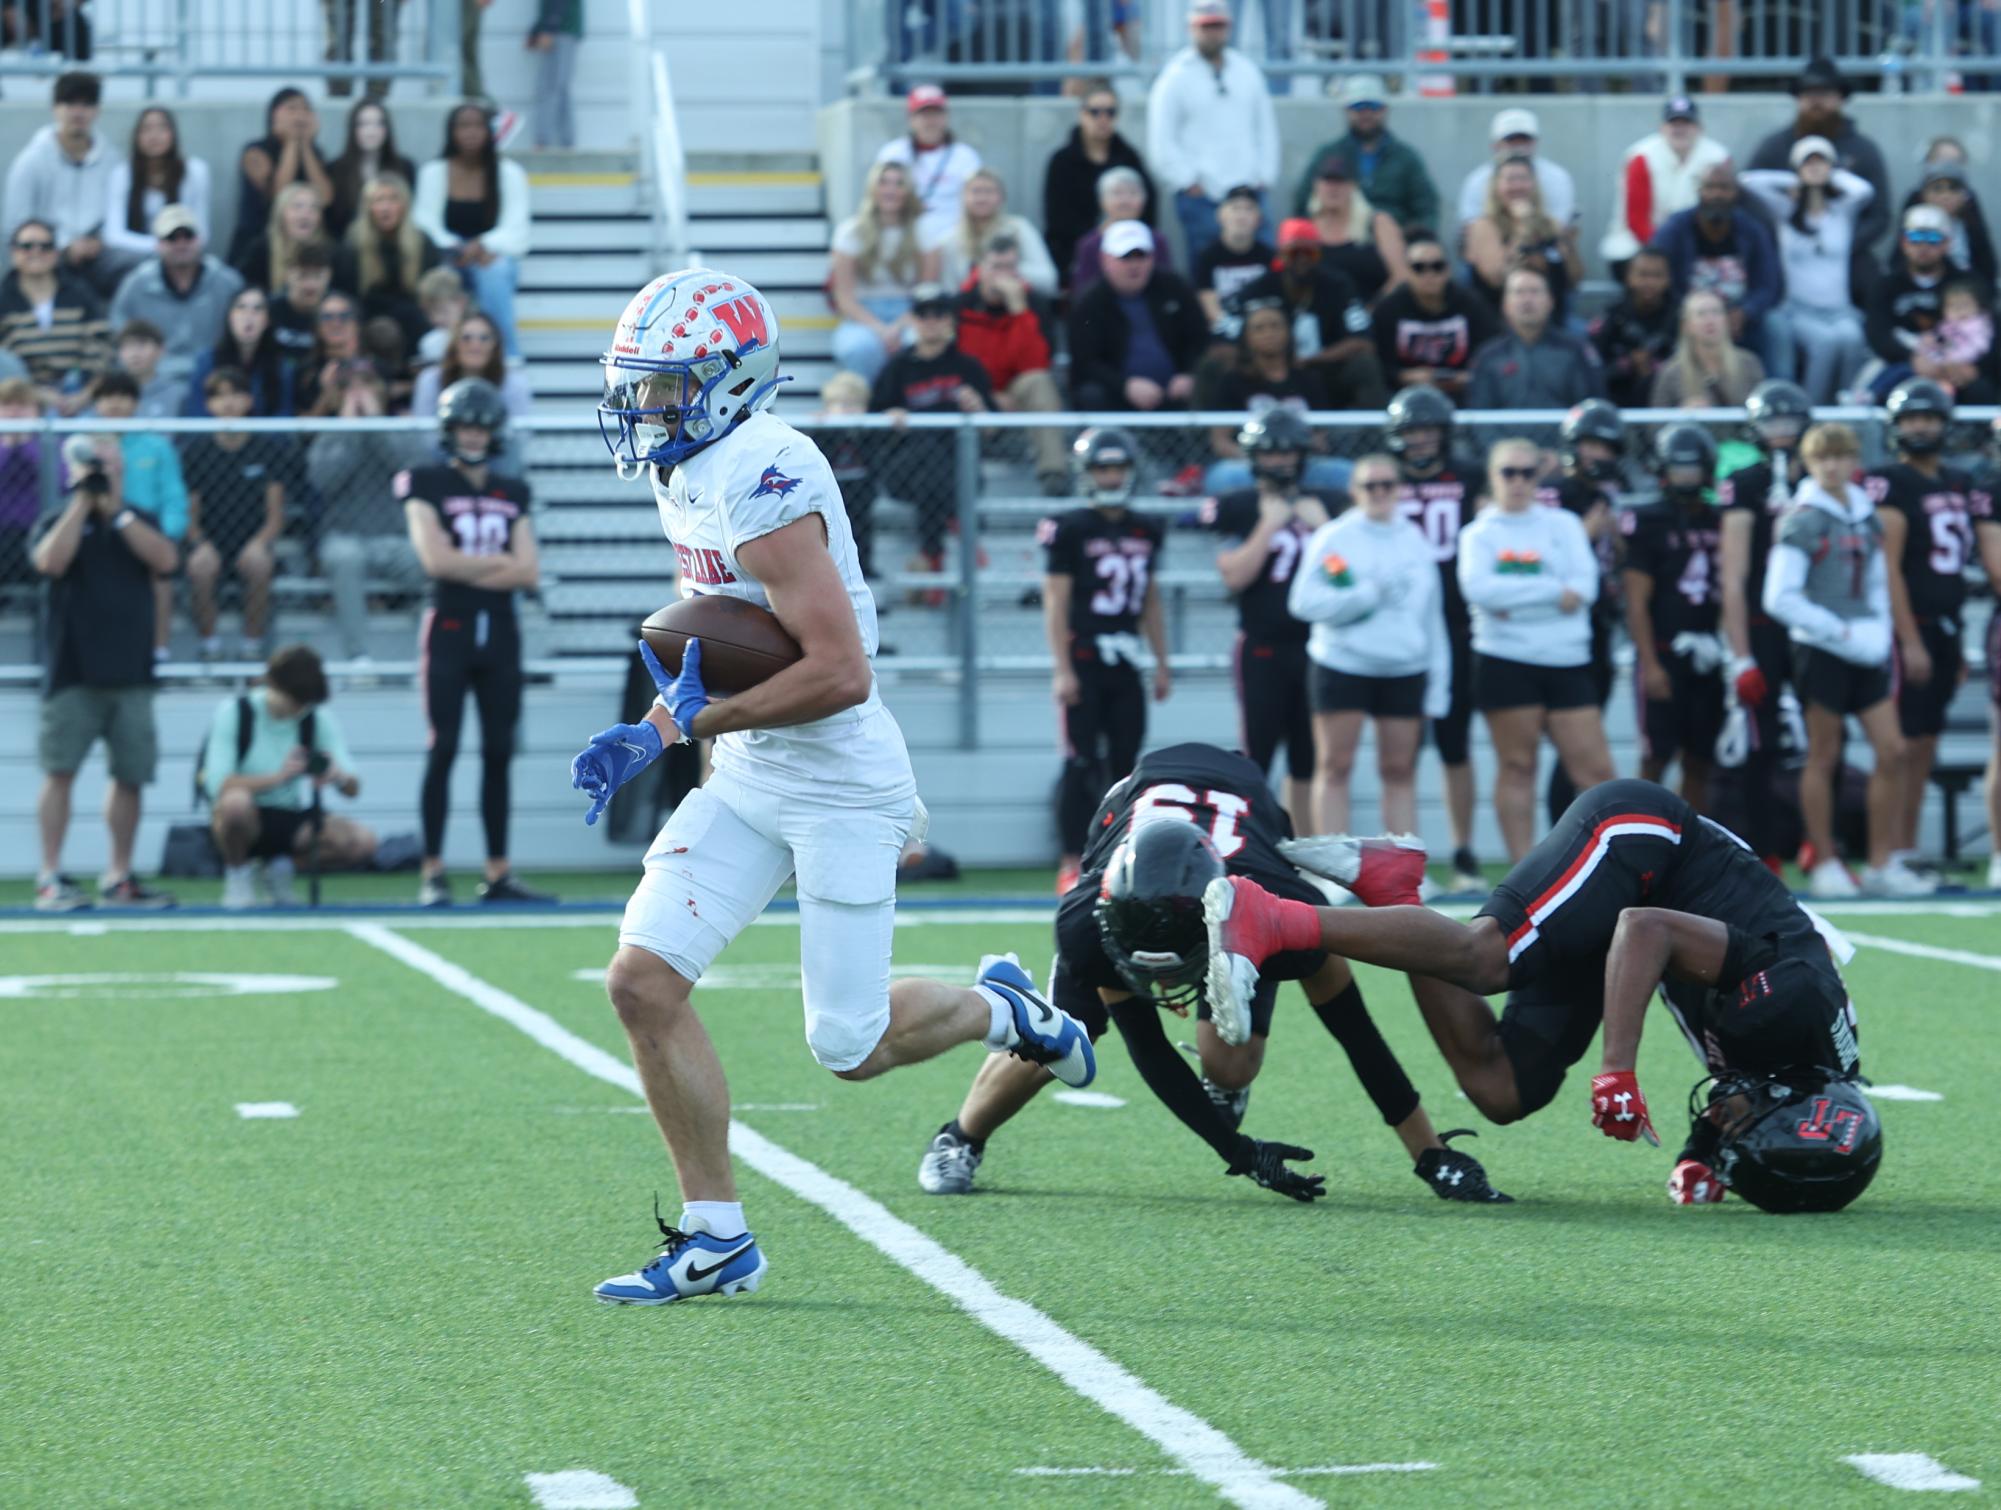 Westlake claim 7th consecutive 6A DI Region IV title with thrilling win over Lake Travis